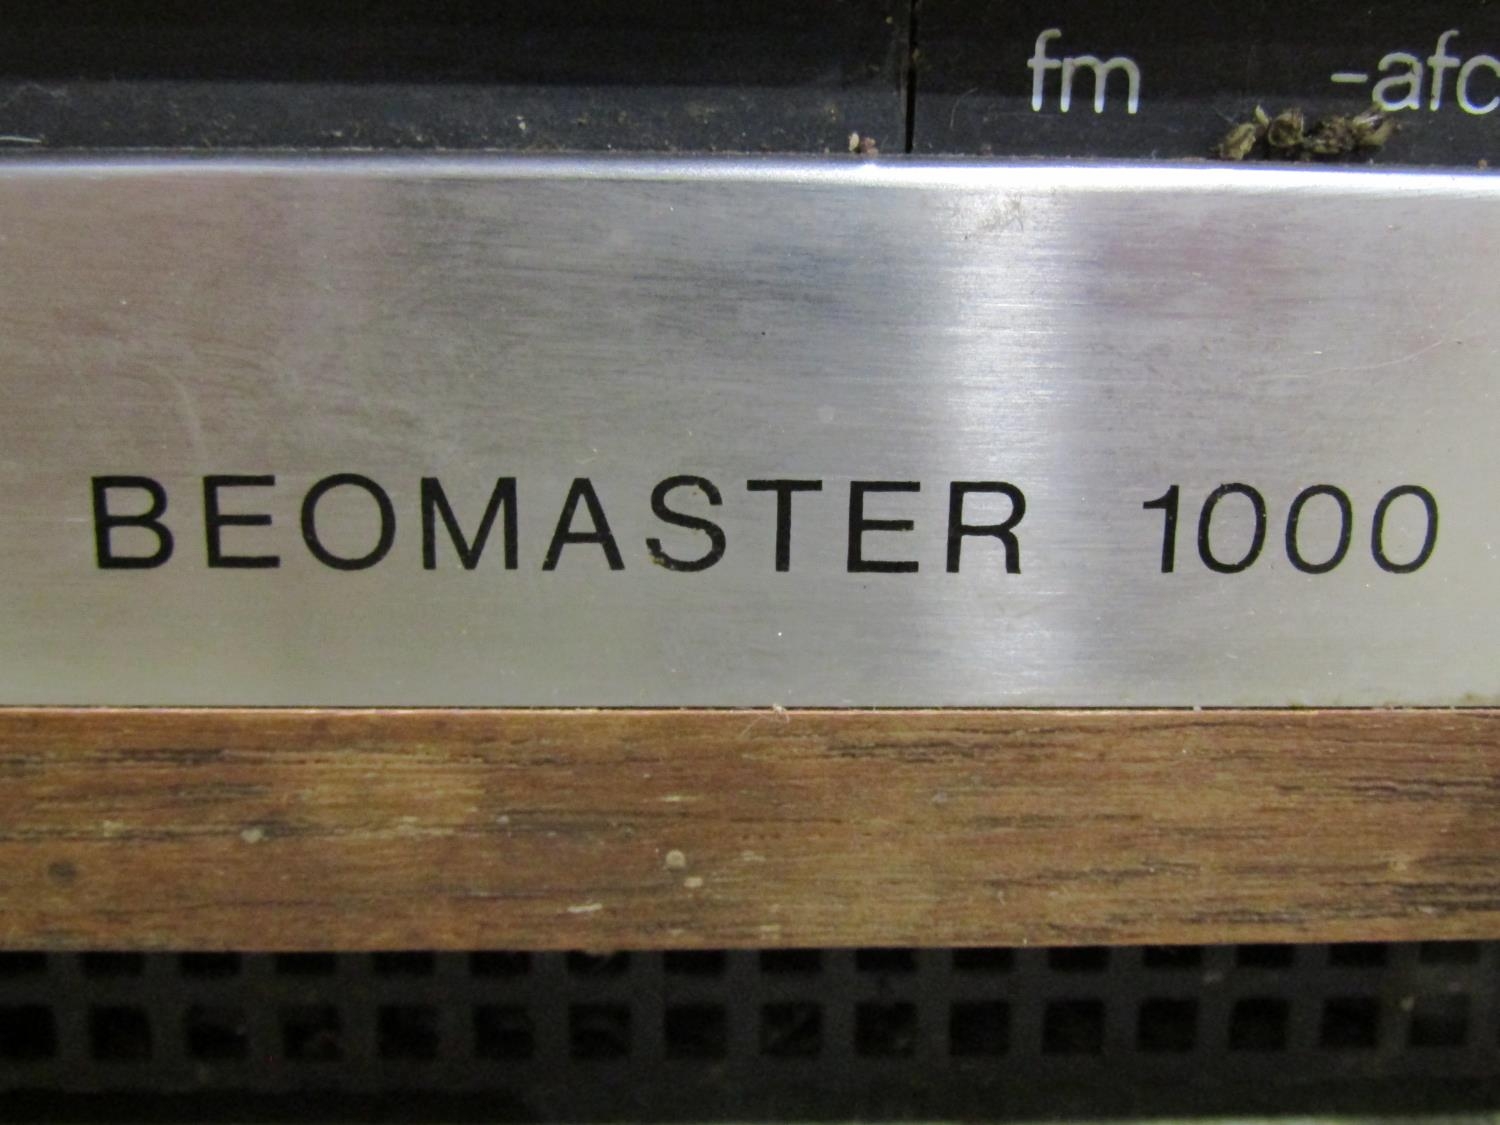 A vintage Bang & Olufsen audio set comprising Beomaster 1000, a 1000 Beogram record deck, and a pair - Image 12 of 12